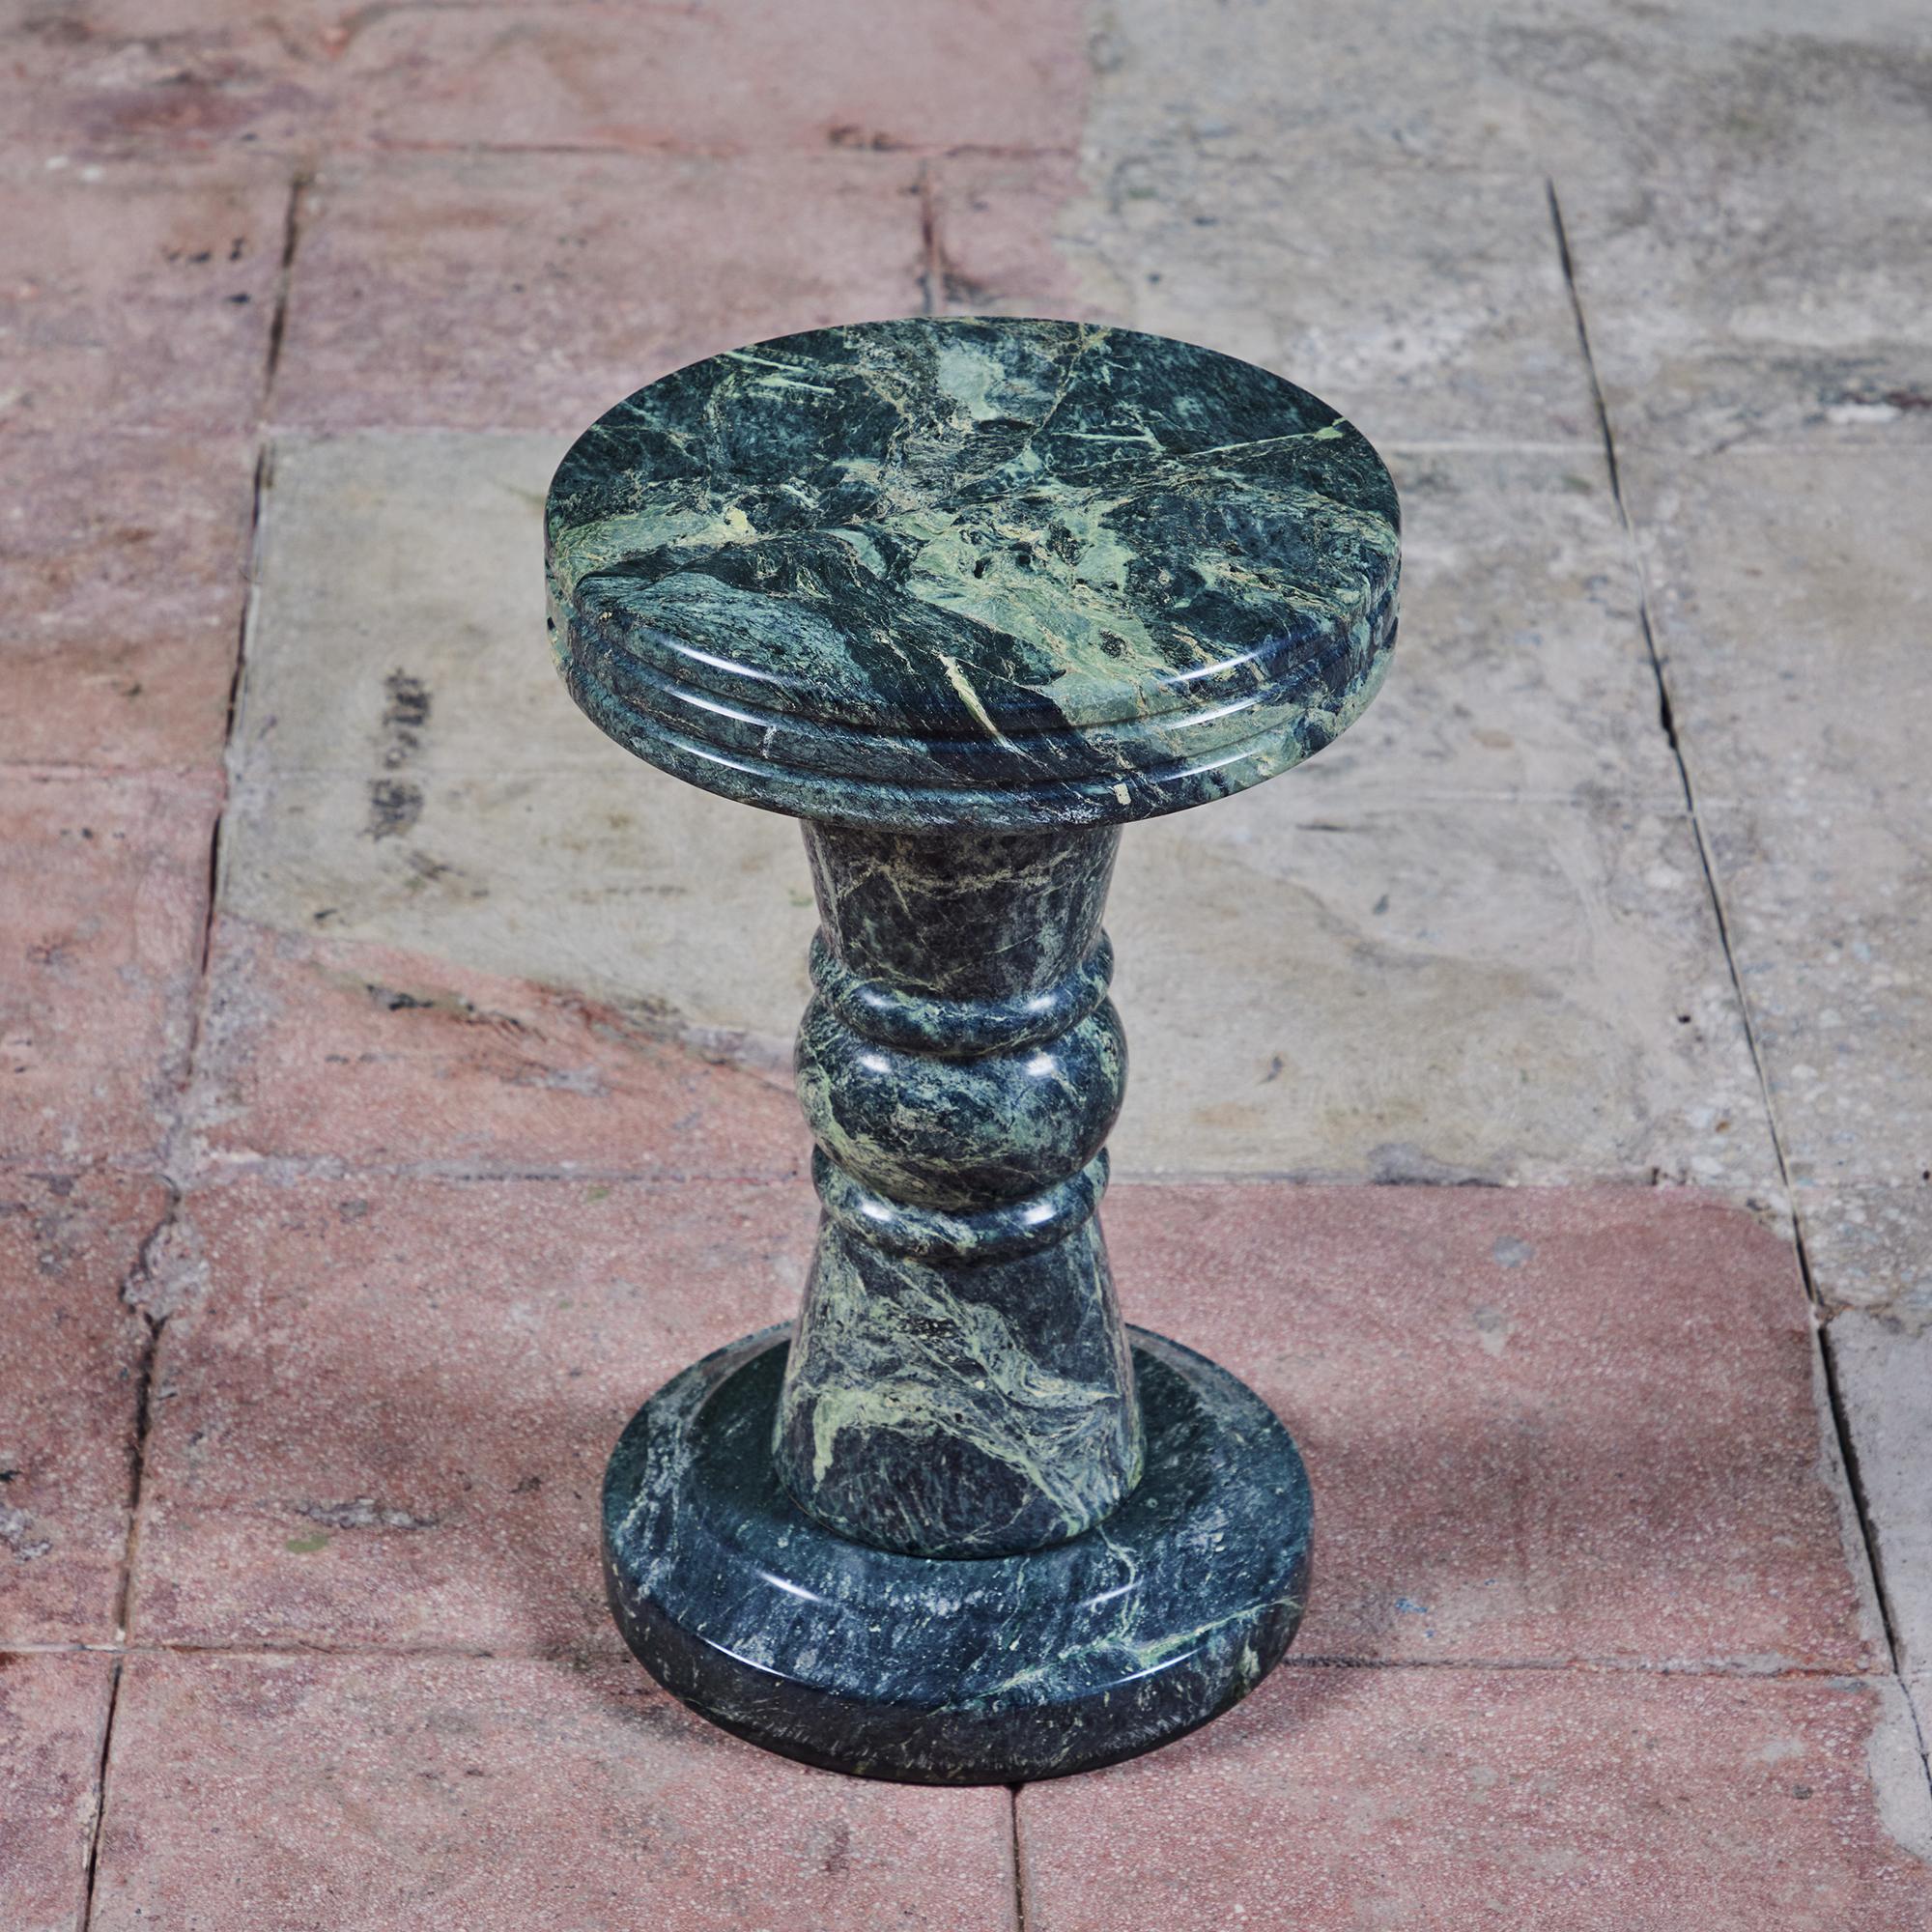 Roman style green marble pedestal side table or stool. The table features a rich green body with varying tones of green veining throughout. The table top as two incised lines around the outer rim of the table and a circular base that mimics the top.